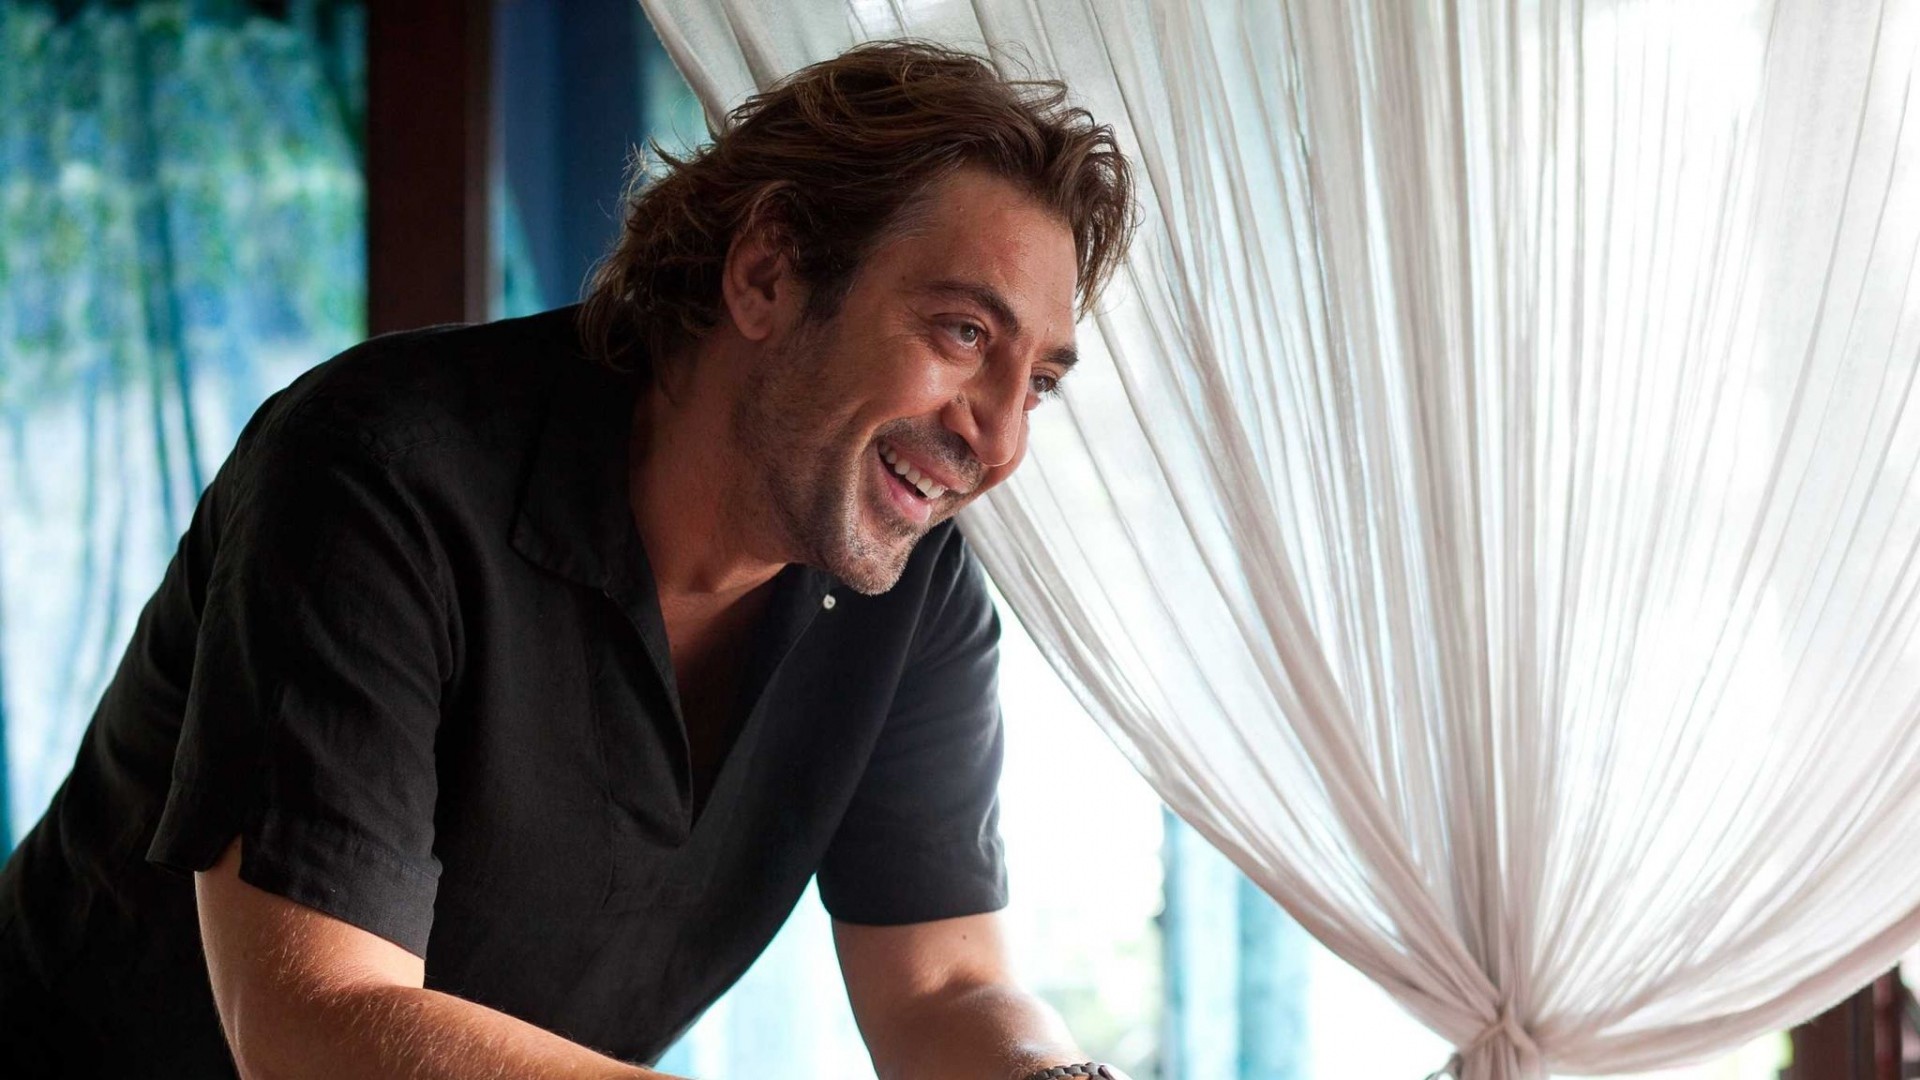 Javier bardem smile curly t shirt actor